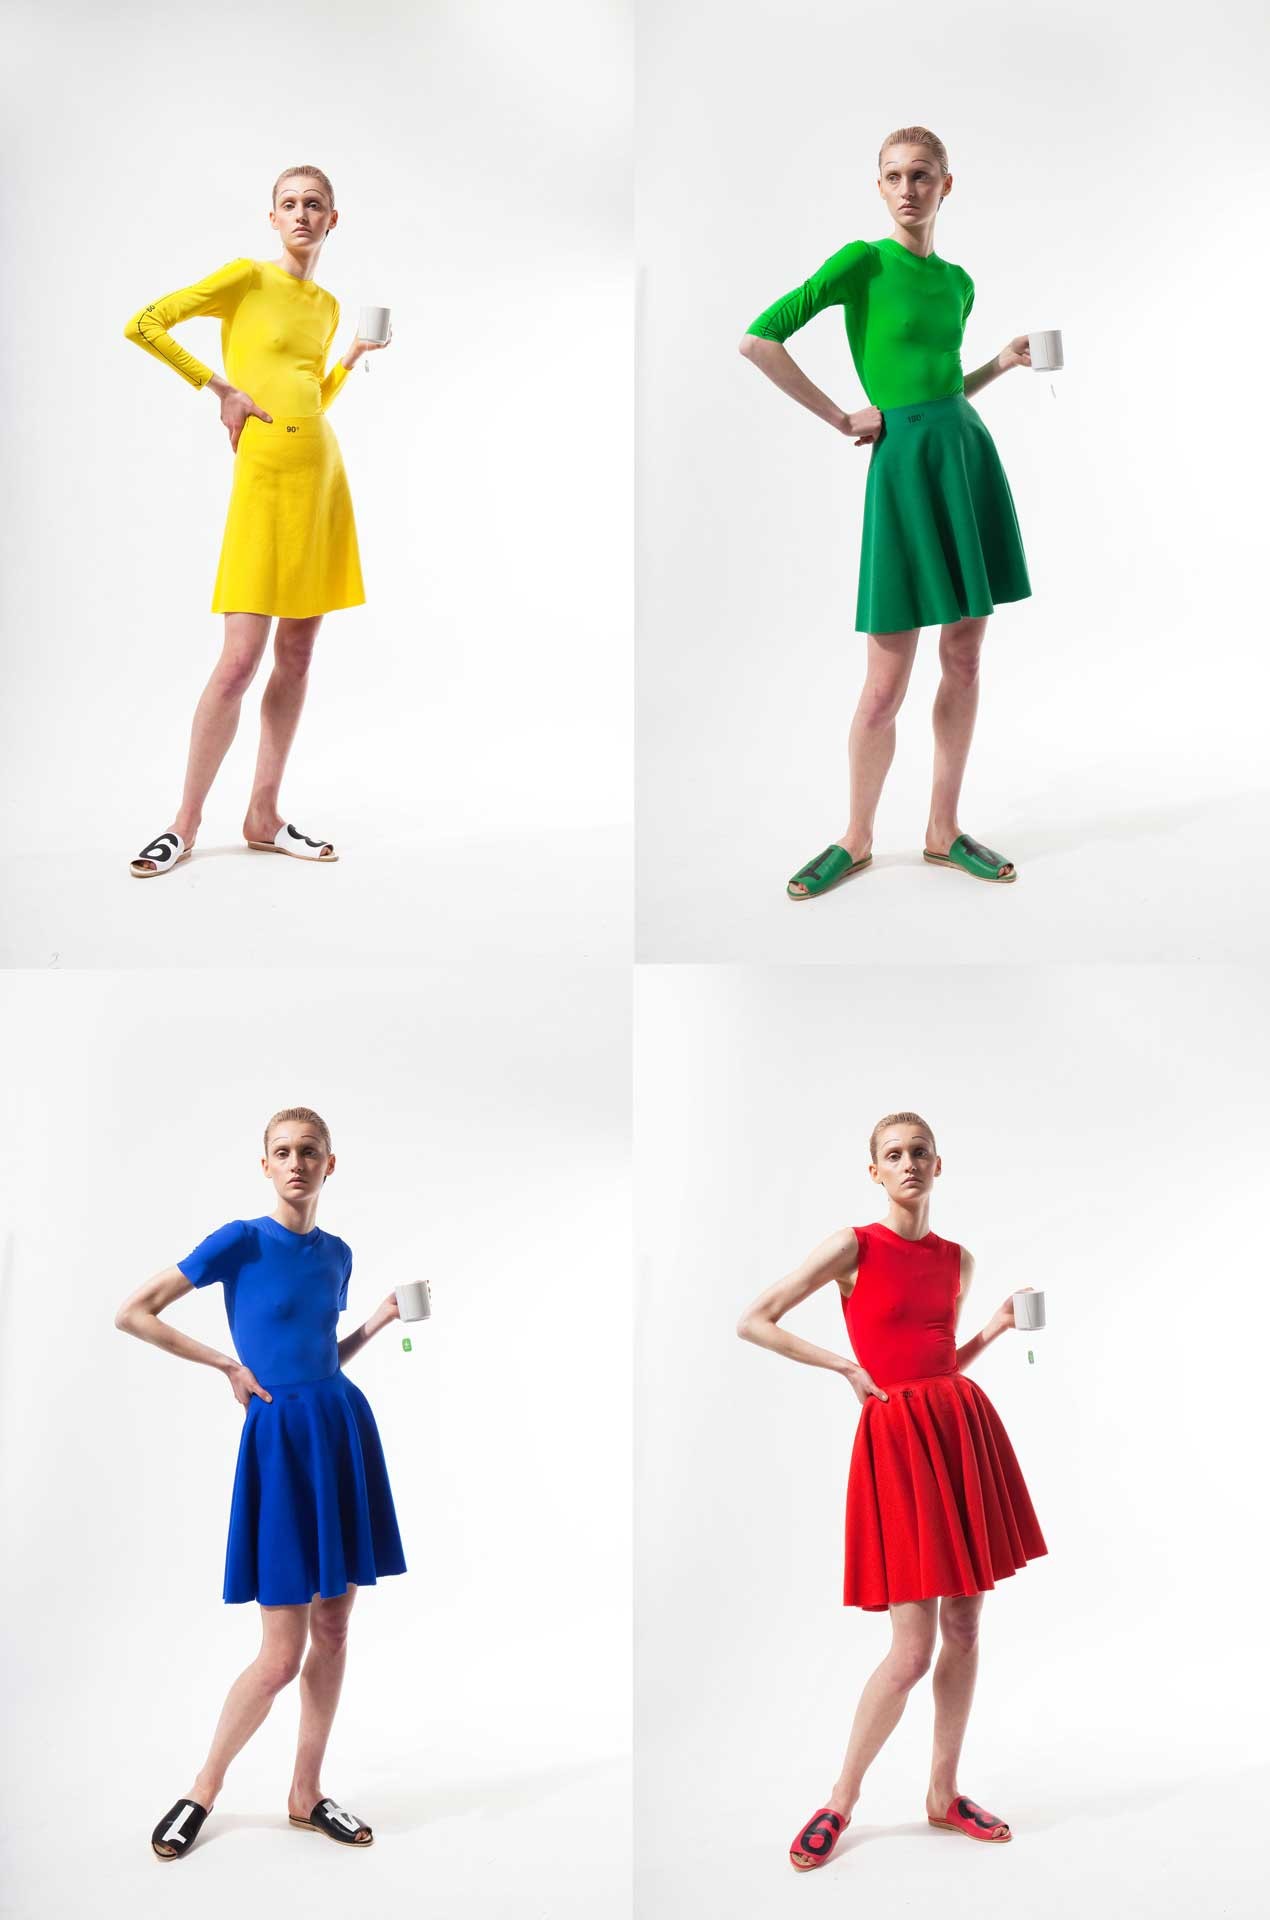 Four models in long shot, one model wears a yellow outfit, another a green one, yet another a blue one and one a red one.